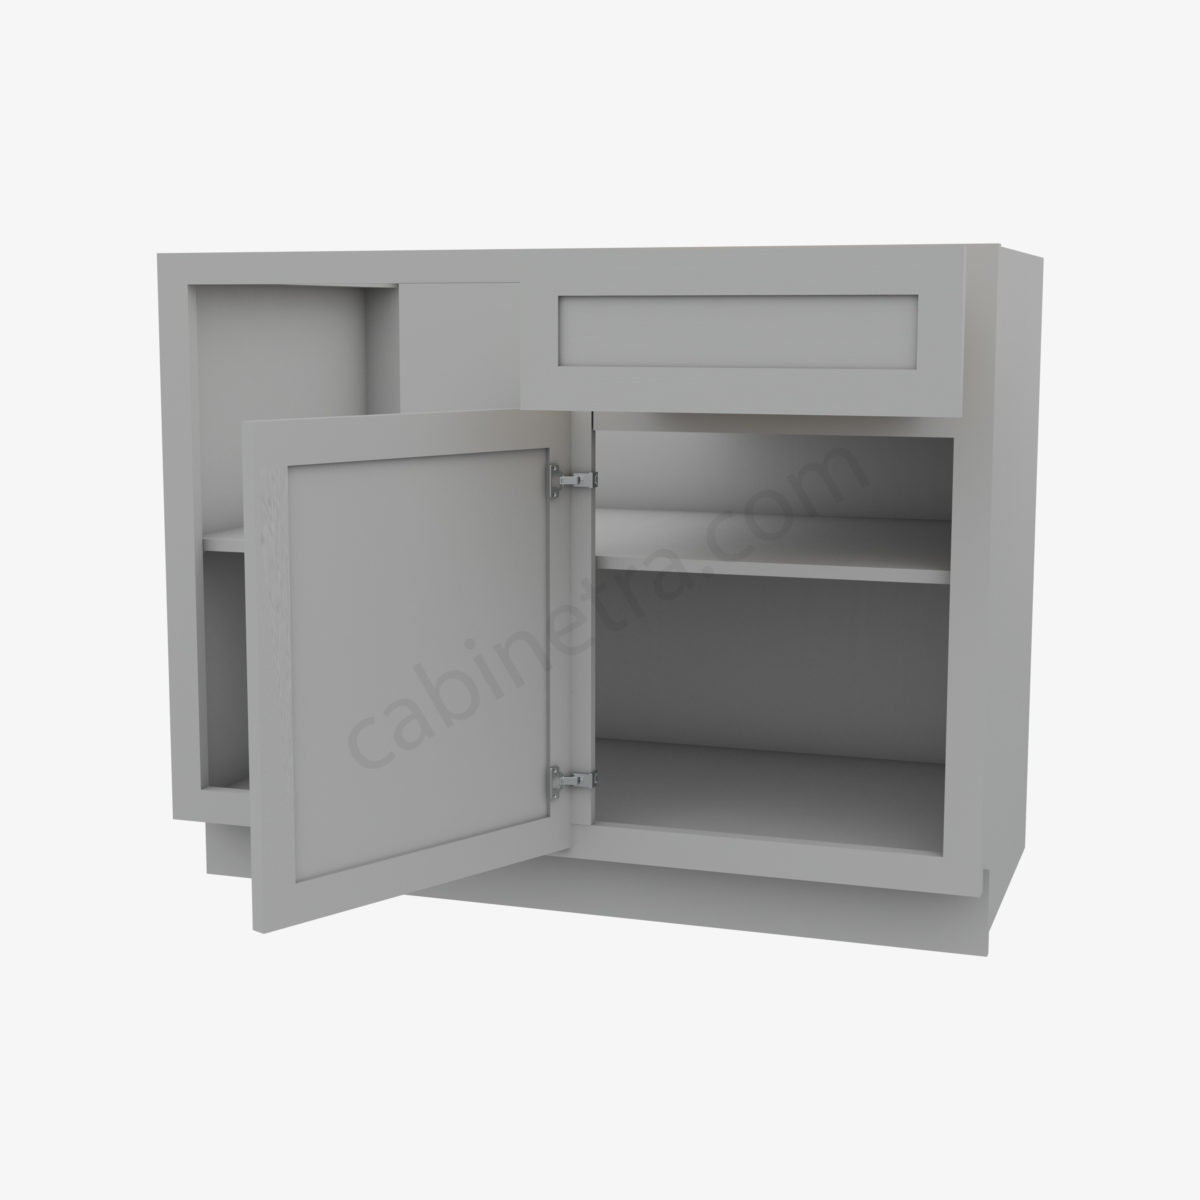 AB BBLC45 48 42W 5 Forevermark Lait Gray Shaker Cabinetra scaled